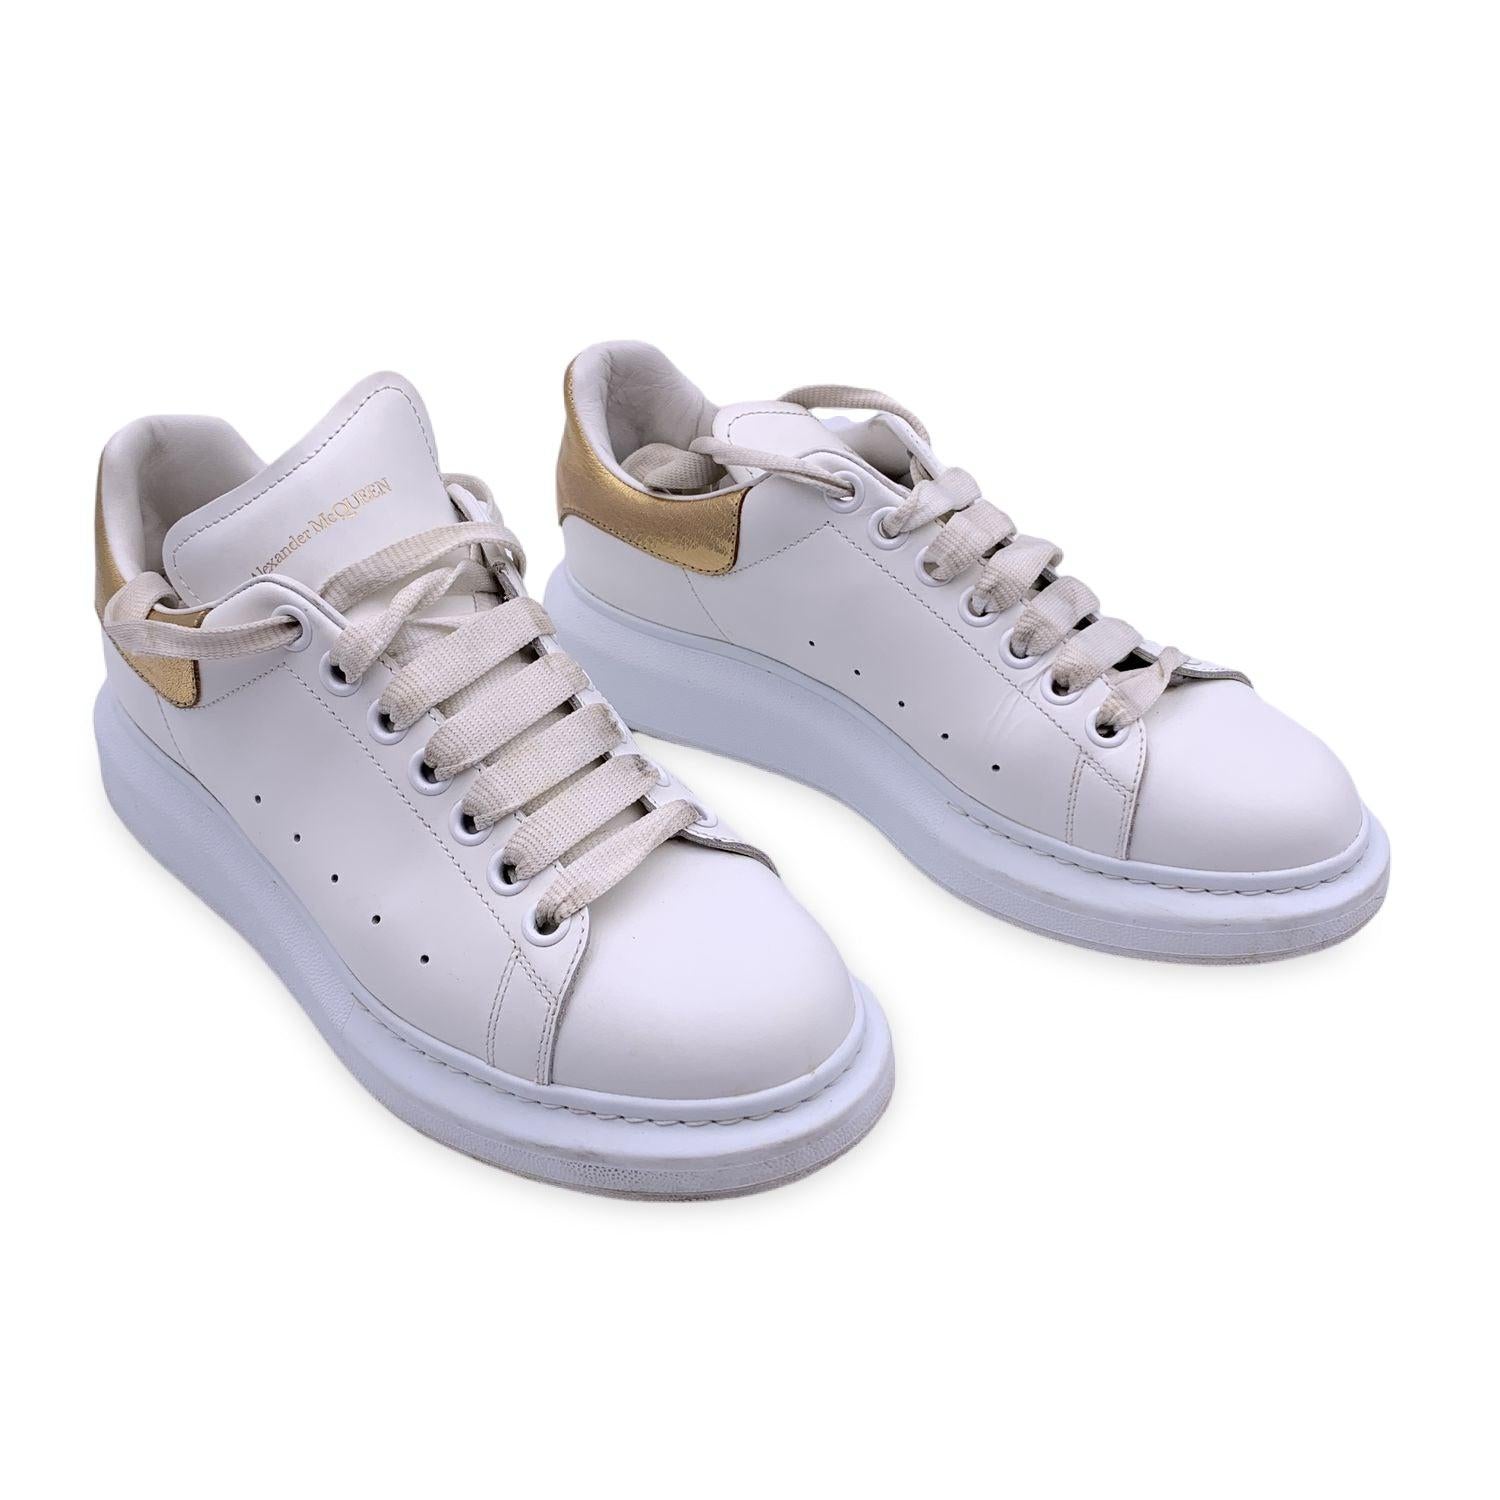 White sneakers in smooth shiny calfskin by Alexander McQueen. They feature laces, round oversized rubber toe and gold metal details on the back. Perforated finish on the outside. Leather lined interior. 7 metal holes. Flat laces. Alexander McQueen